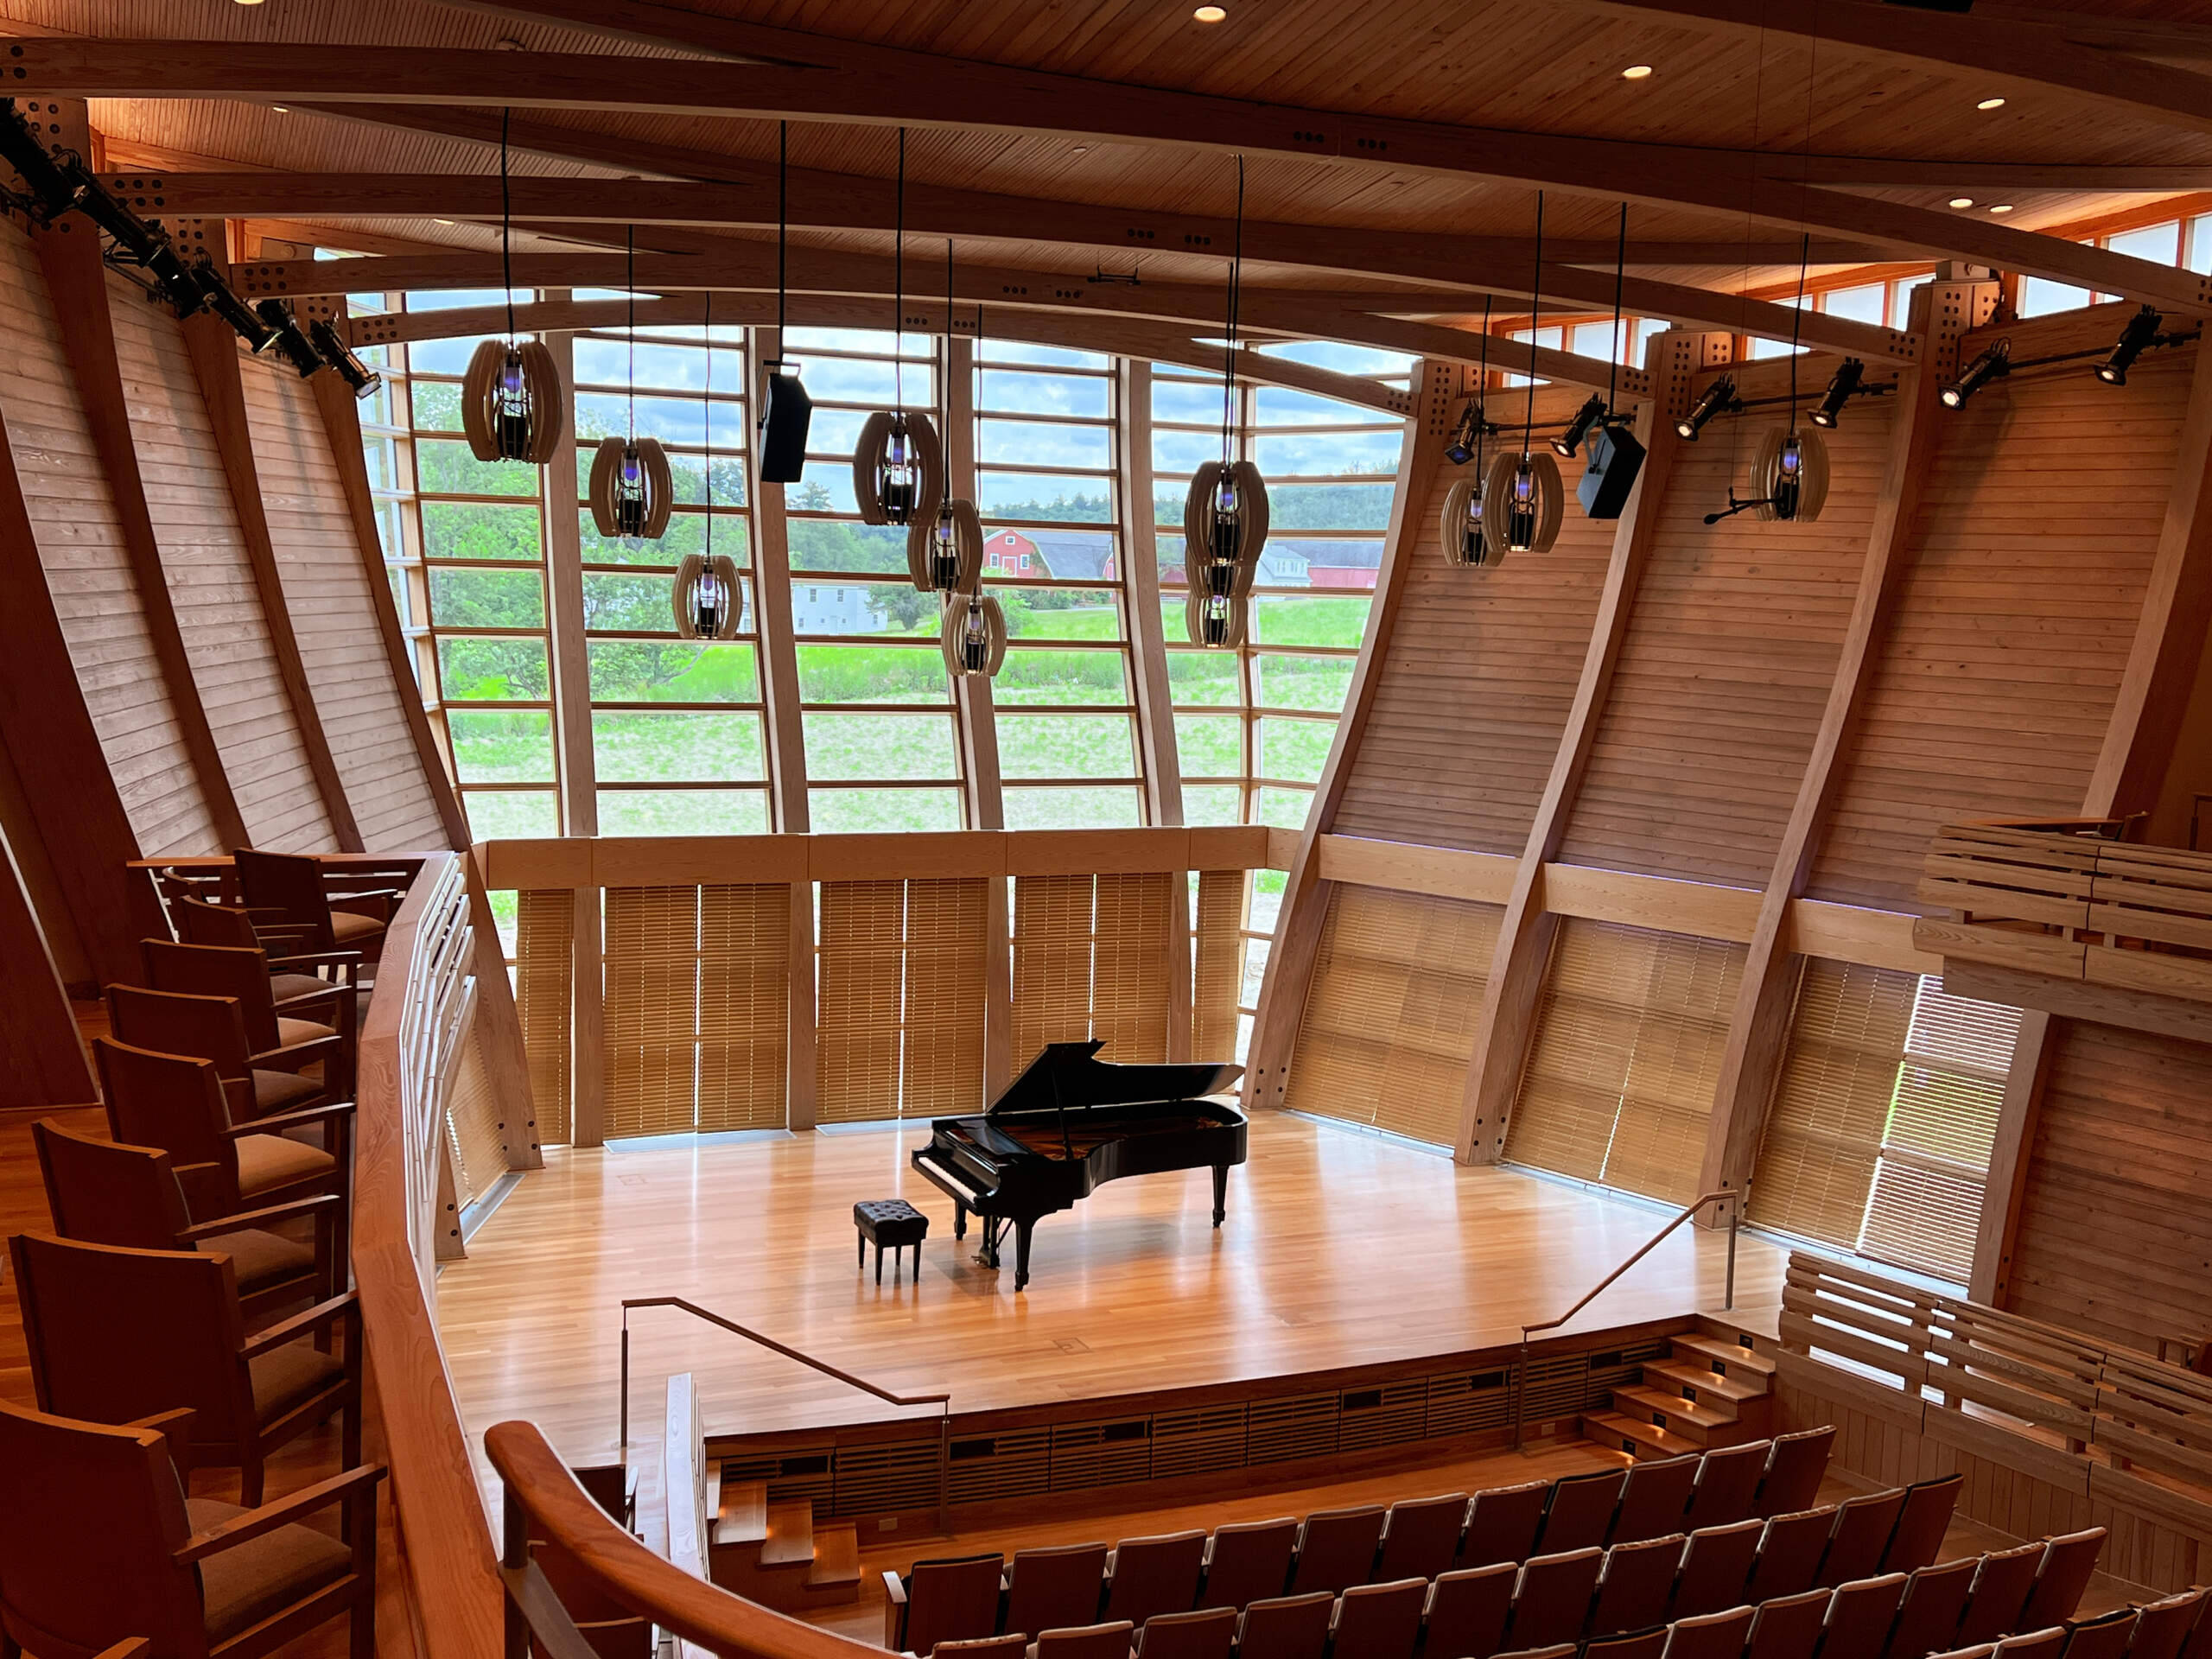 Meadow Hall at Groton Hill Music Center (Courtesy of Groton Hill Music Center)